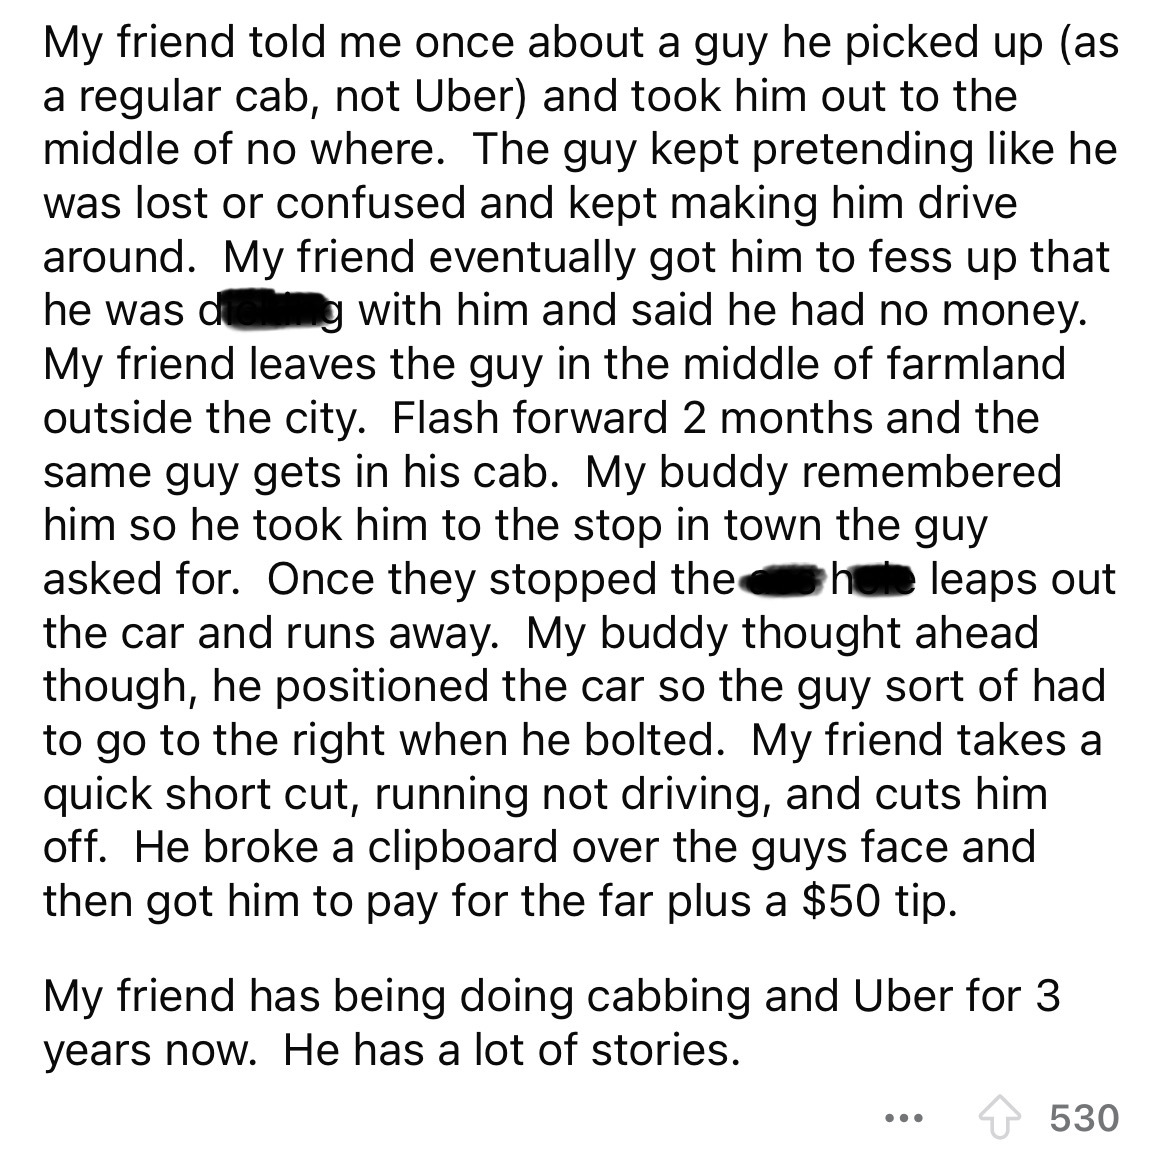 document - My friend told me once about a guy he picked up as a regular cab, not Uber and took him out to the middle of no where. The guy kept pretending he was lost or confused and kept making him drive around. My friend eventually got him to fess up tha